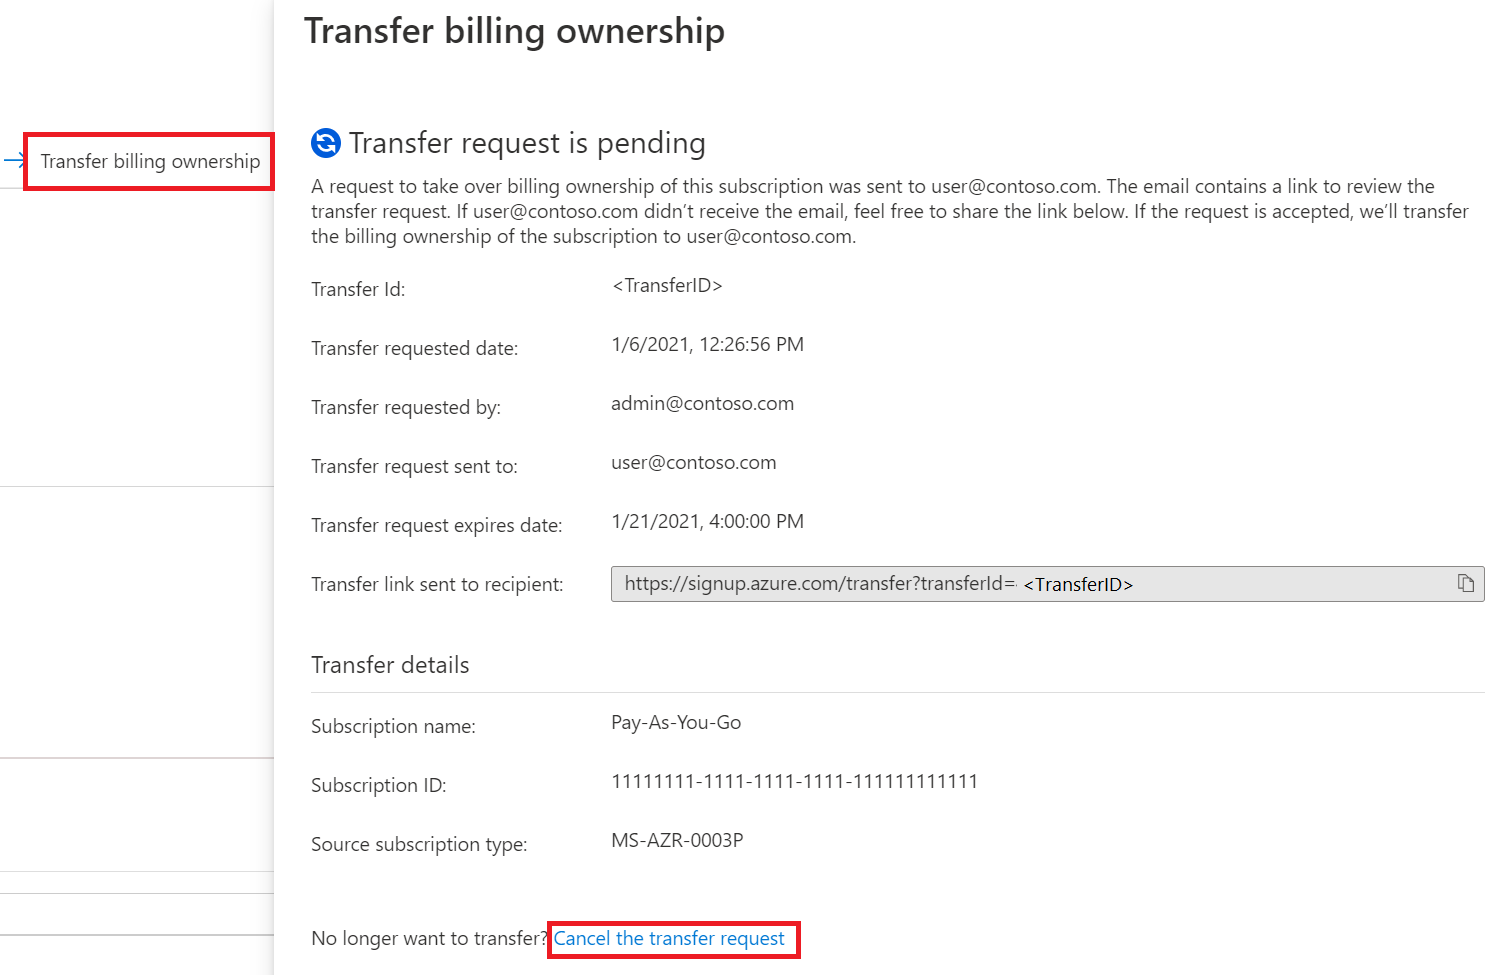 Screenshot showing the Transfer billing ownership window with the Cancel the transfer request option.